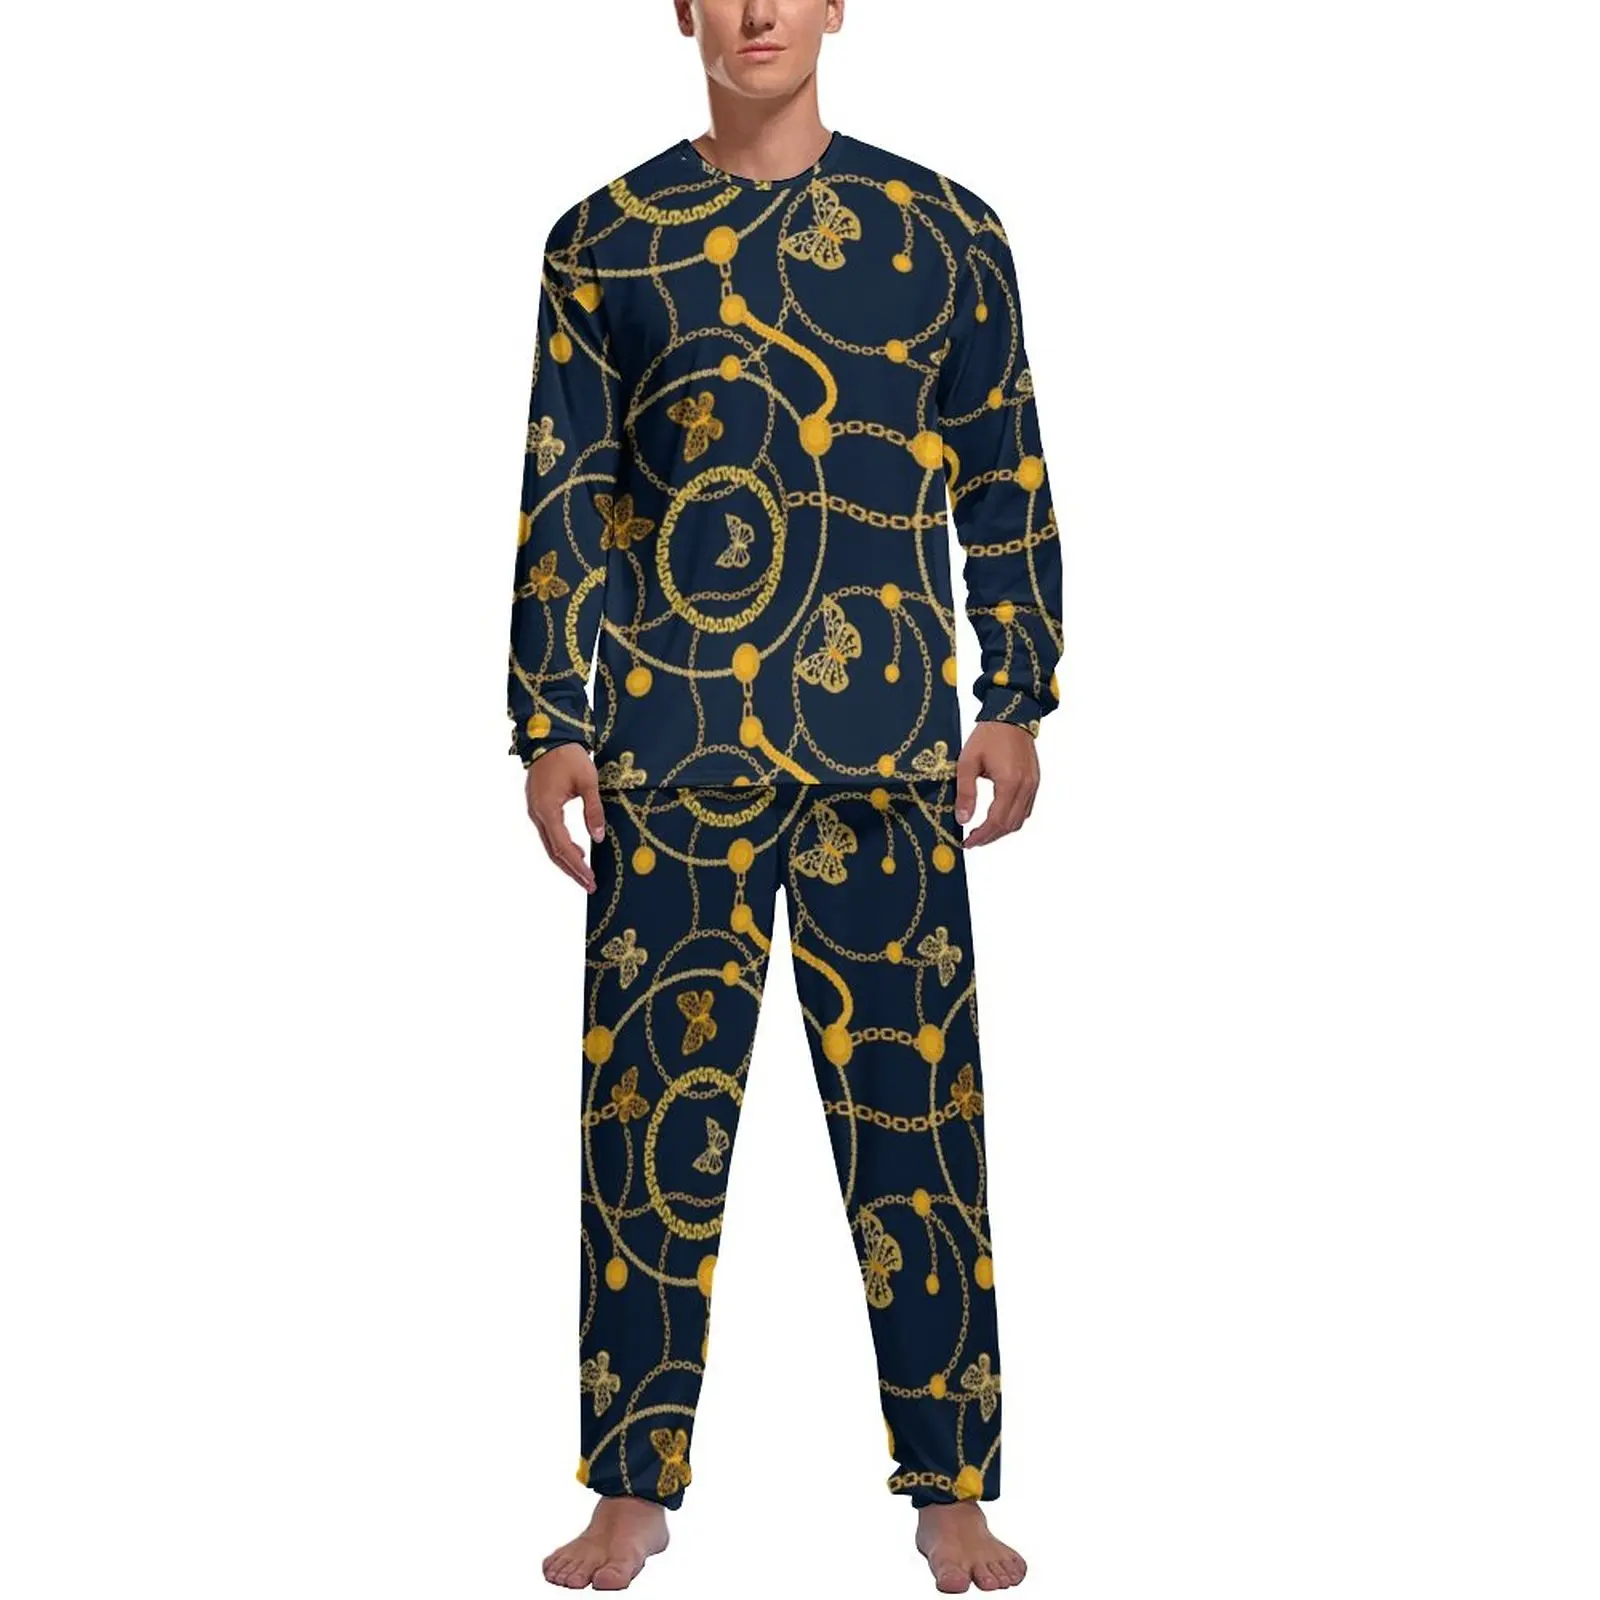 Chain Print Pajamas Autumn Gold Butterflies Casual Nightwear Male 2 Pieces Printed Long Sleeves Warm Pajama Sets